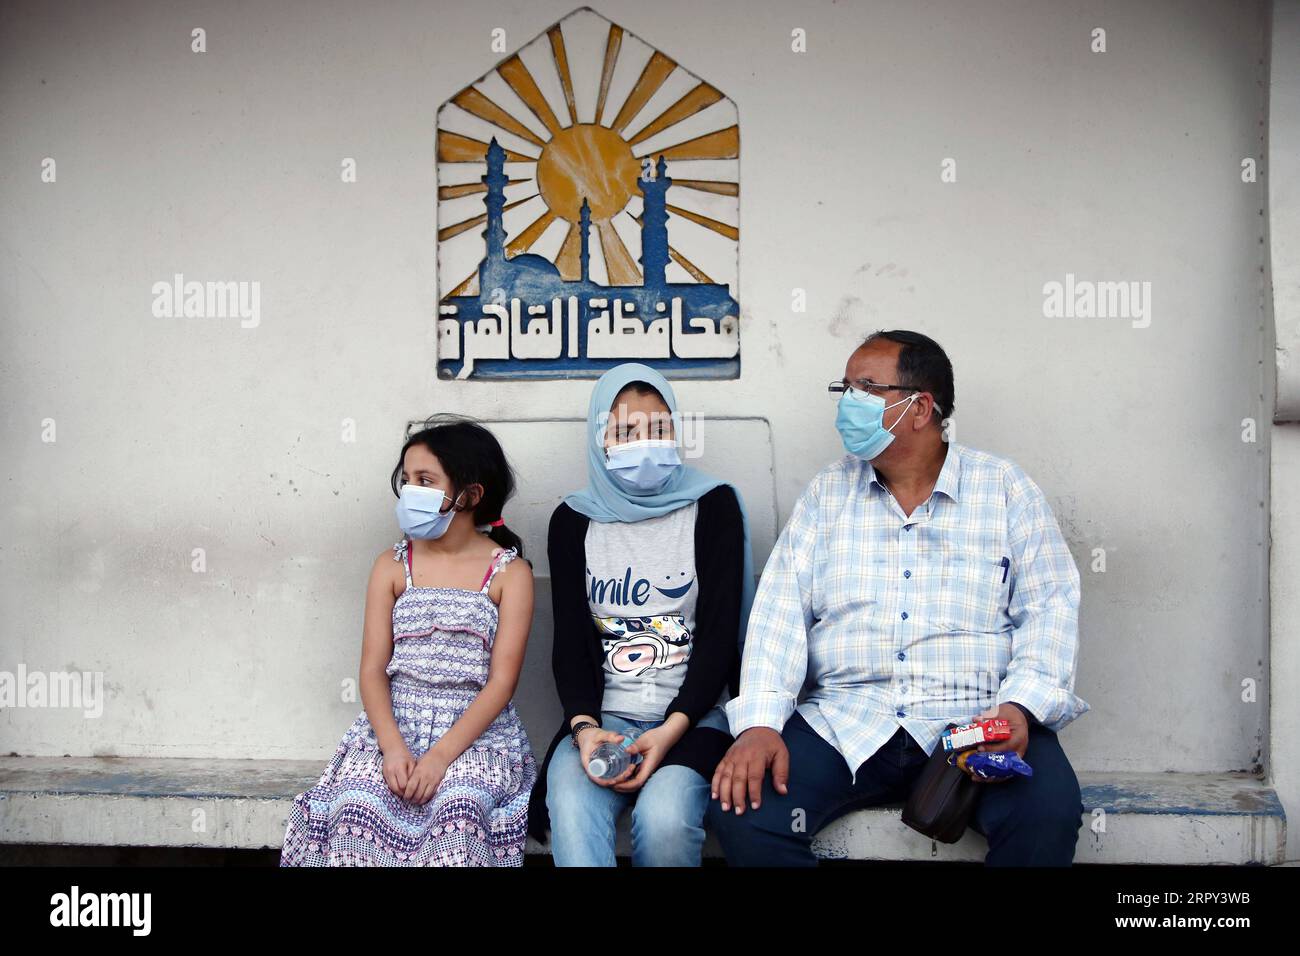 200612 -- CAIRO, June 12, 2020 Xinhua -- People wearing face masks are seen in Cairo, Egypt, on June 12, 2020. Egypt witnessed on Friday a record of 1,577 single-day new COVID-19 cases, raising the total infections confirmed in the country since mid-February to 41,303, said spokesman with the Health Ministry. Xinhua/Ahmed Gomaa EGYPT-CAIRO-COVID-19-CASES PUBLICATIONxNOTxINxCHN Stock Photo